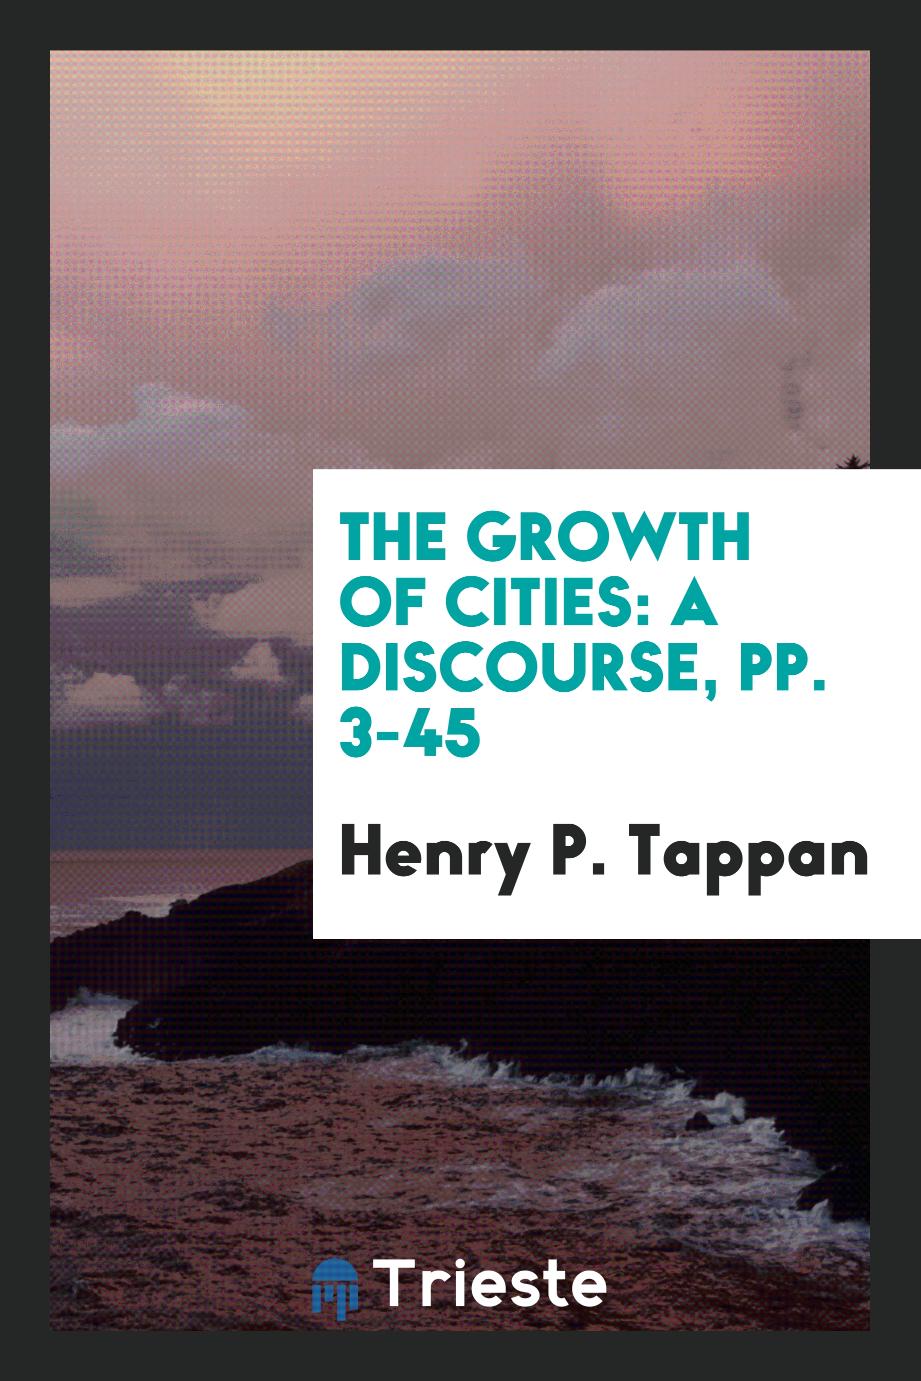 The Growth of Cities: A Discourse, pp. 3-45